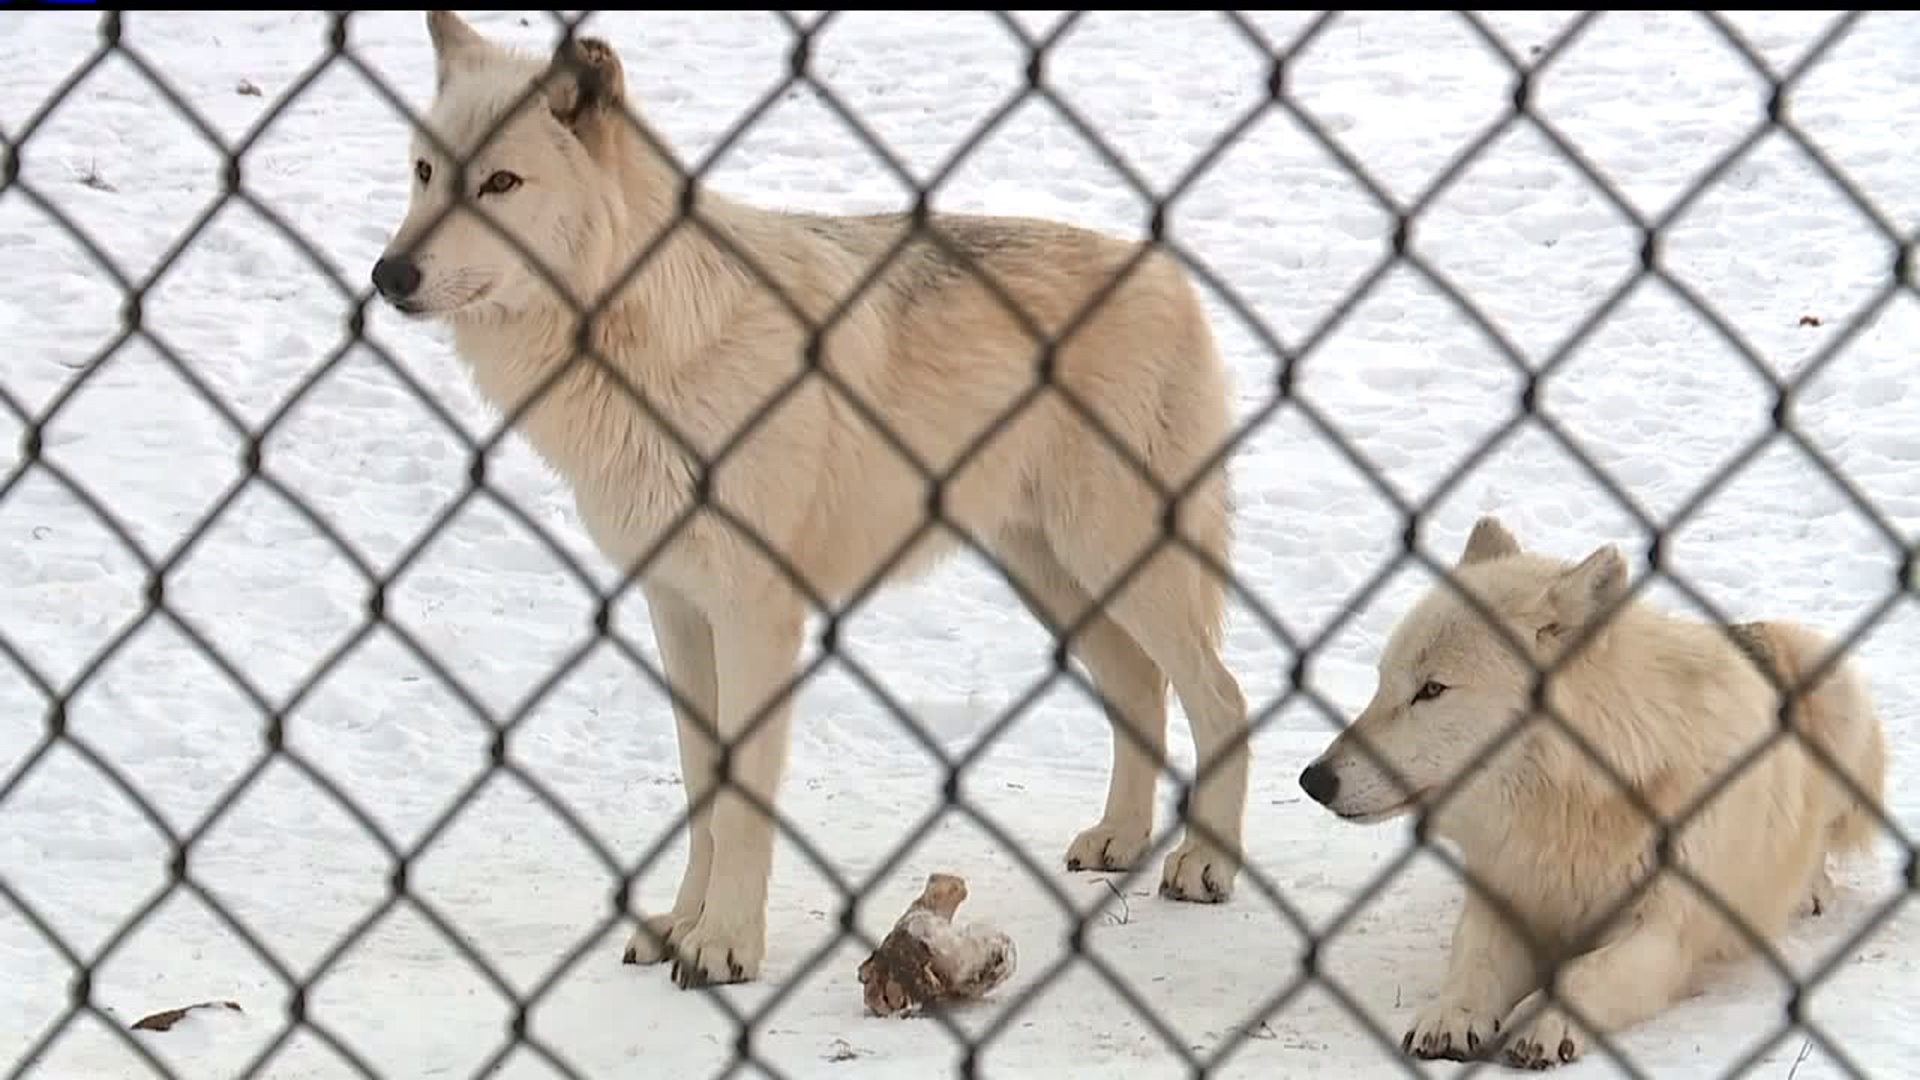 A look at how animals and zookeepers at ZooAmerica handle the brutal cold